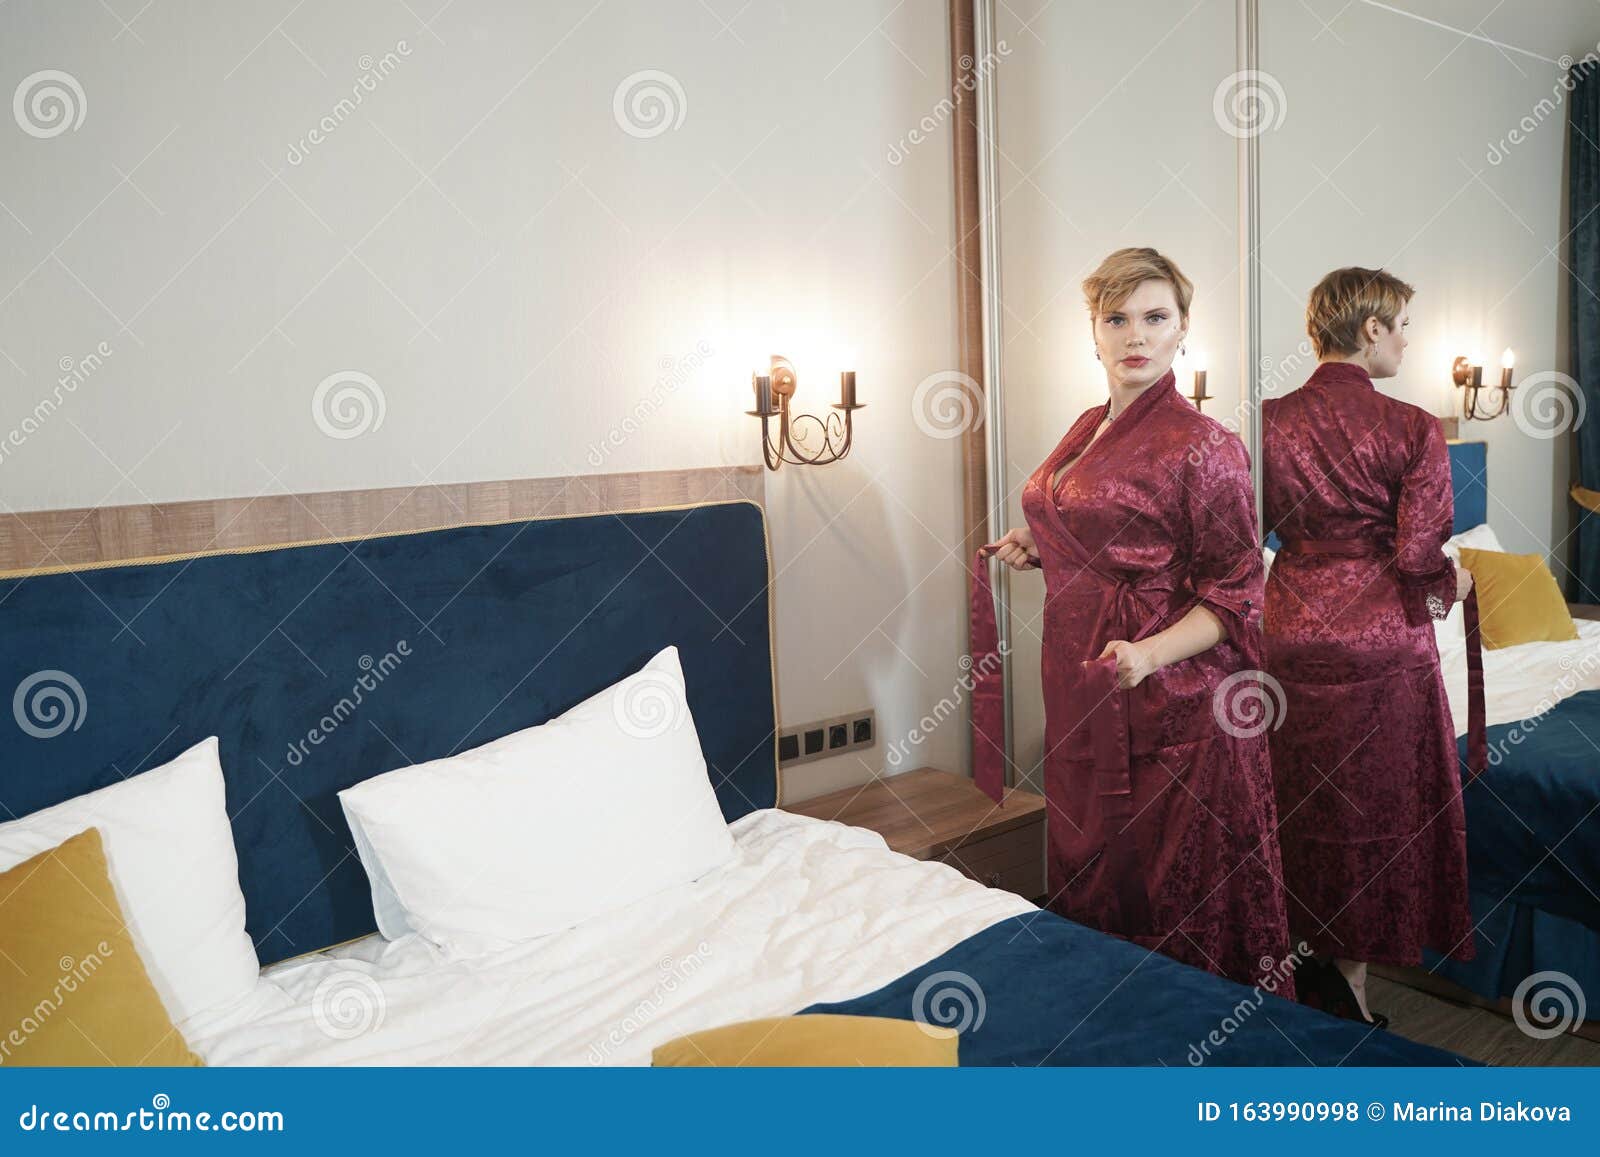 Stylish Pin Up Short Hair Blonde Woman With Plus Size Curvy Body Posing In Fashion Red Bathrobe